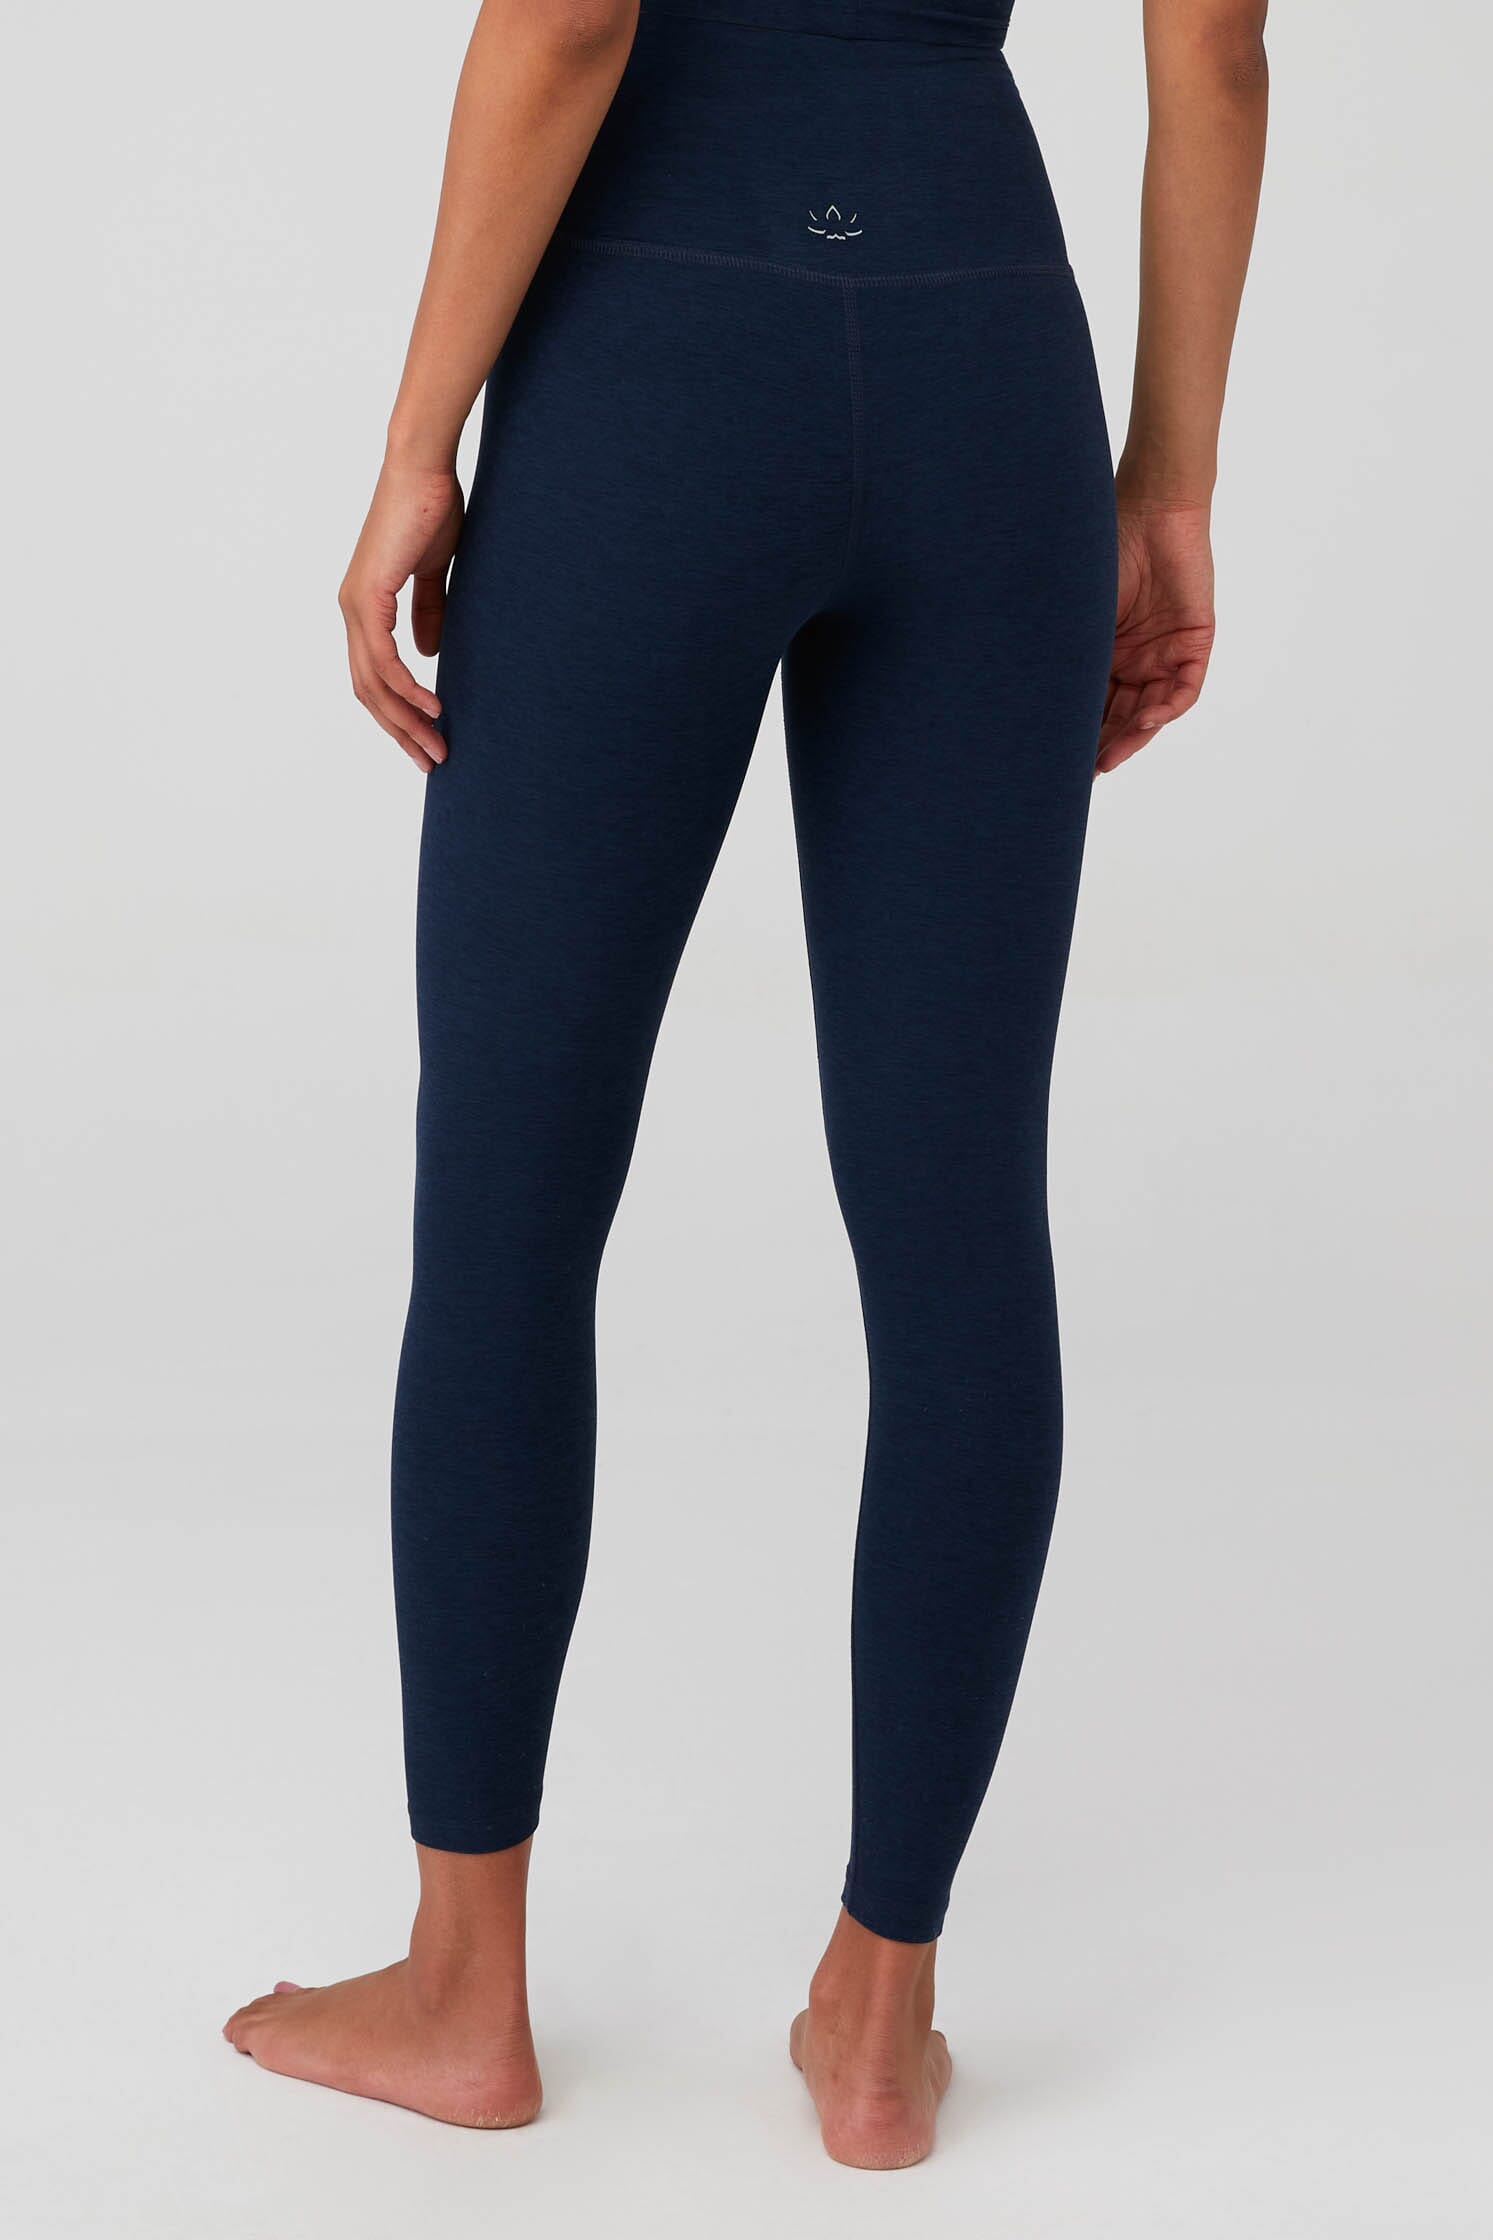 SPACEDYE AT YOUR LEISURE HIGH WAISTED MIDI LEGGING